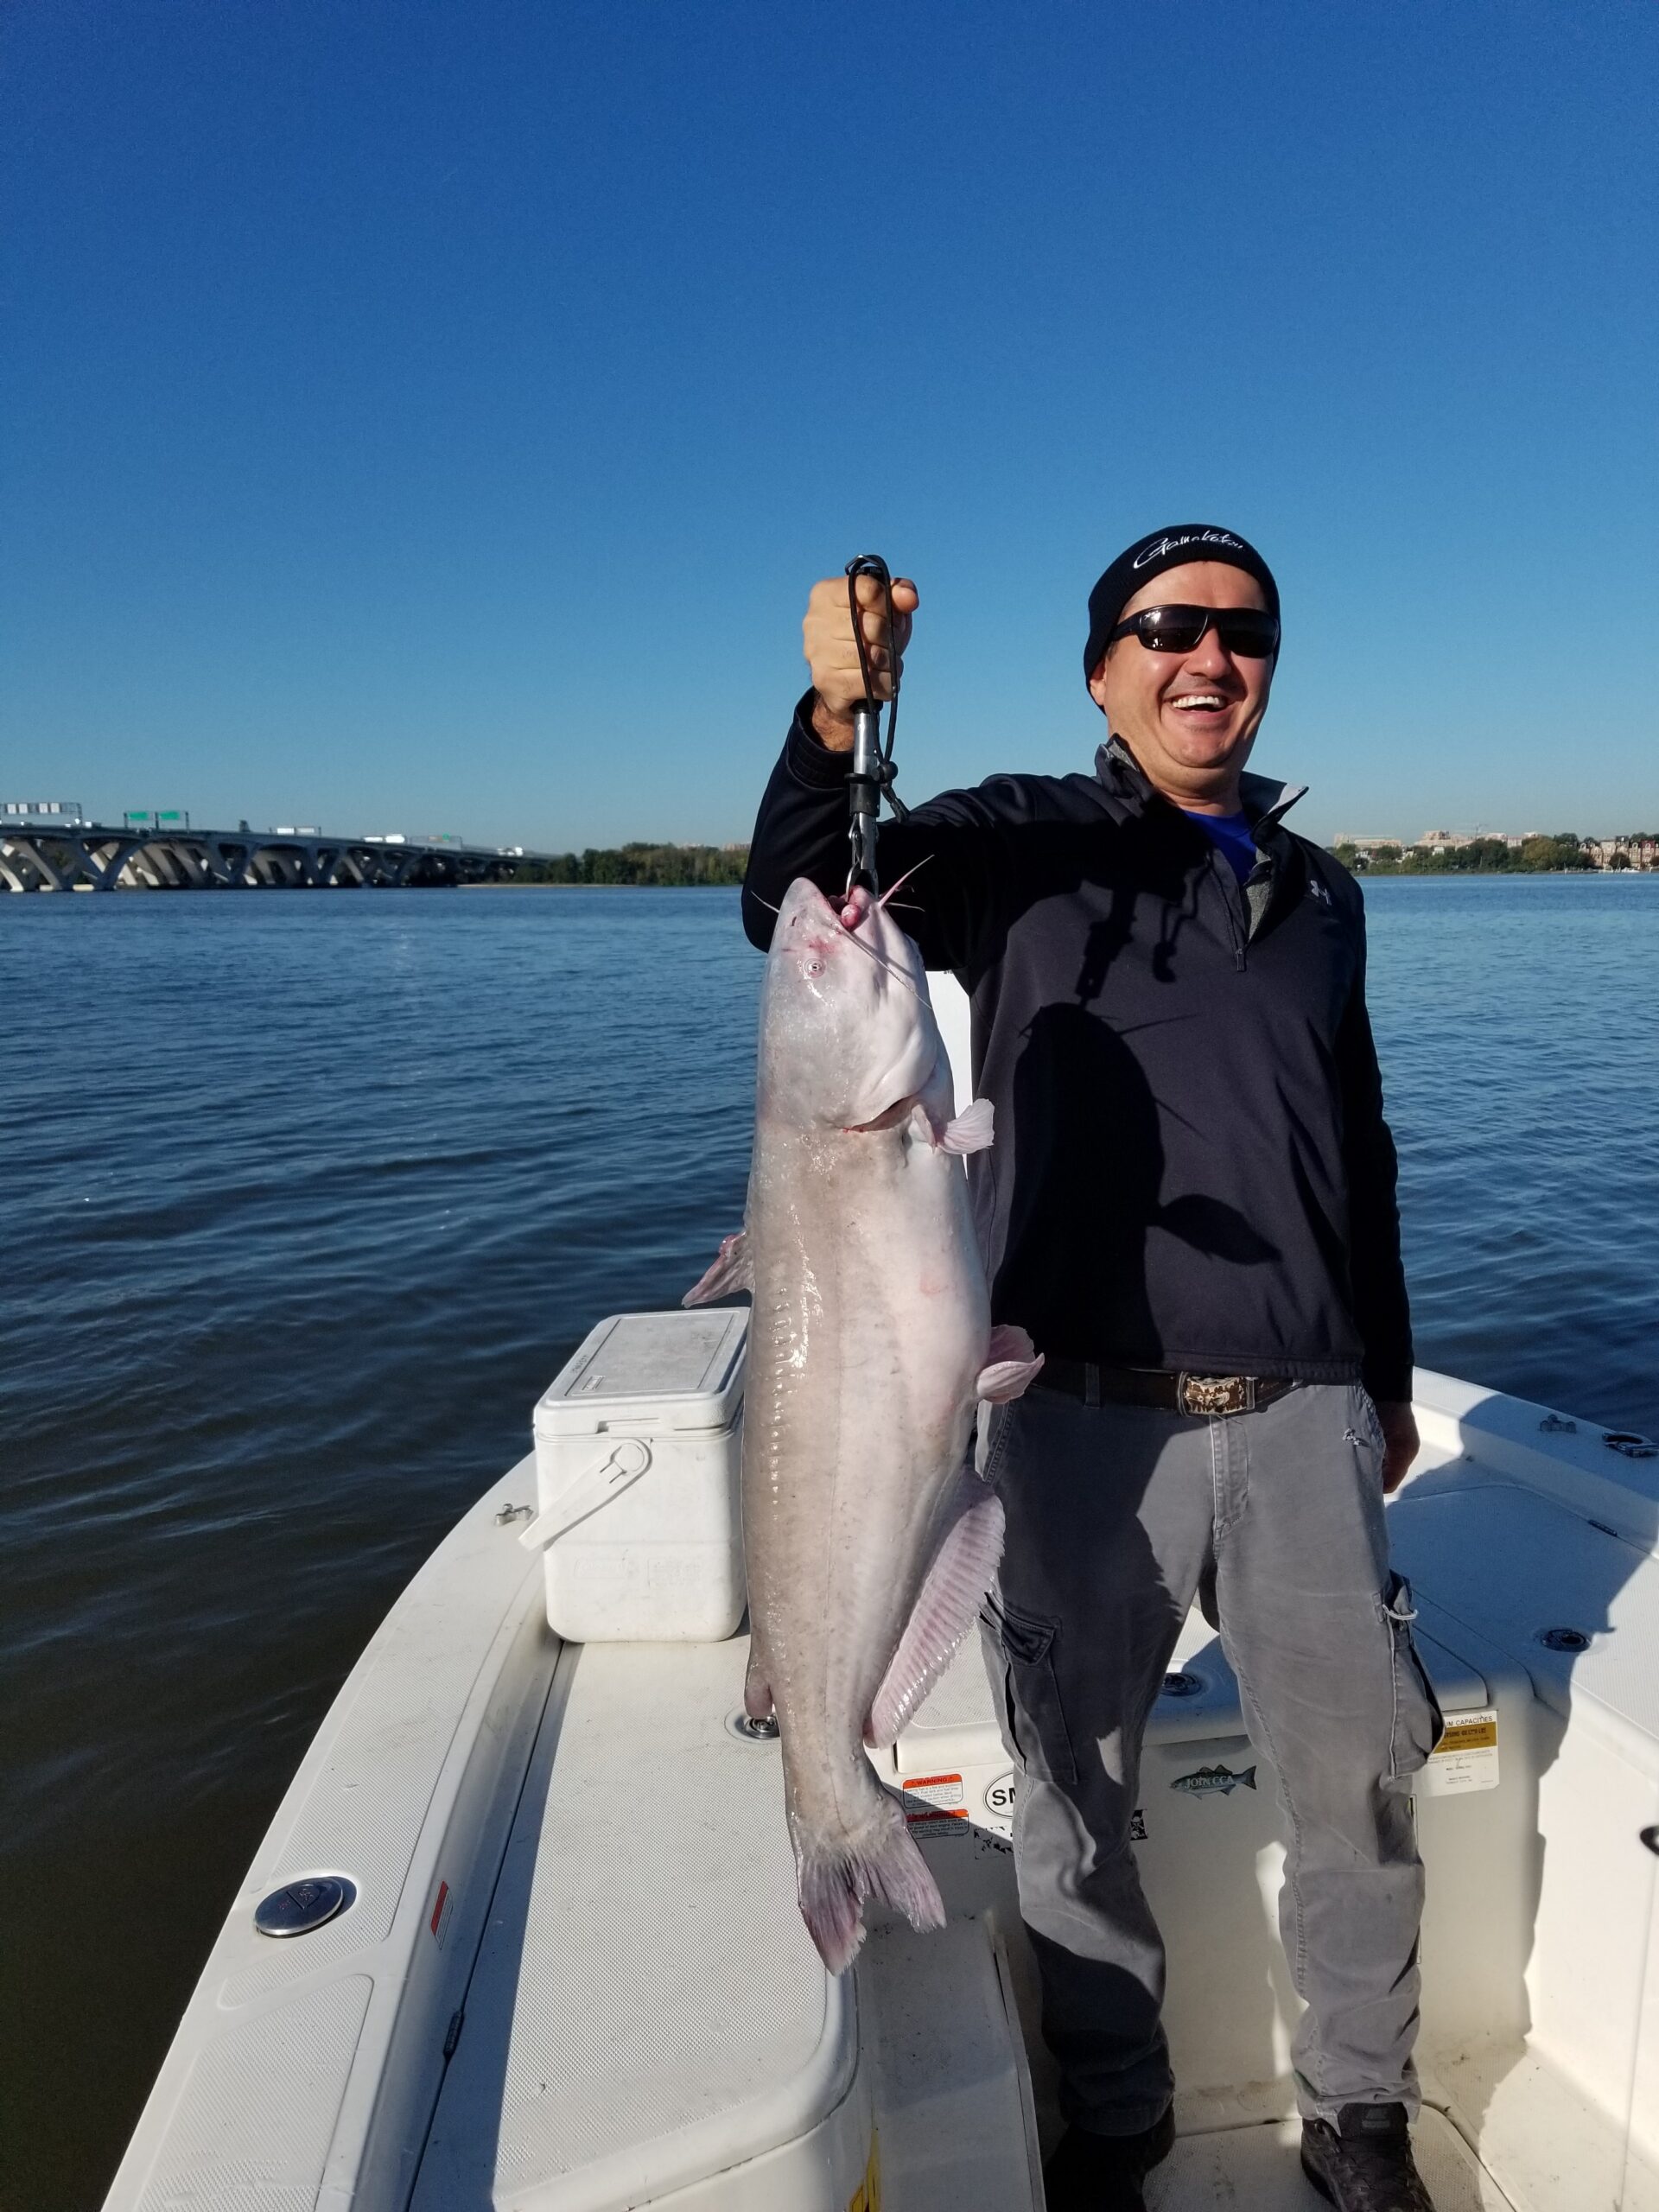 https://indianheadcharters.com/wp-content/uploads/2021/11/10-20-21-2-scaled.jpg